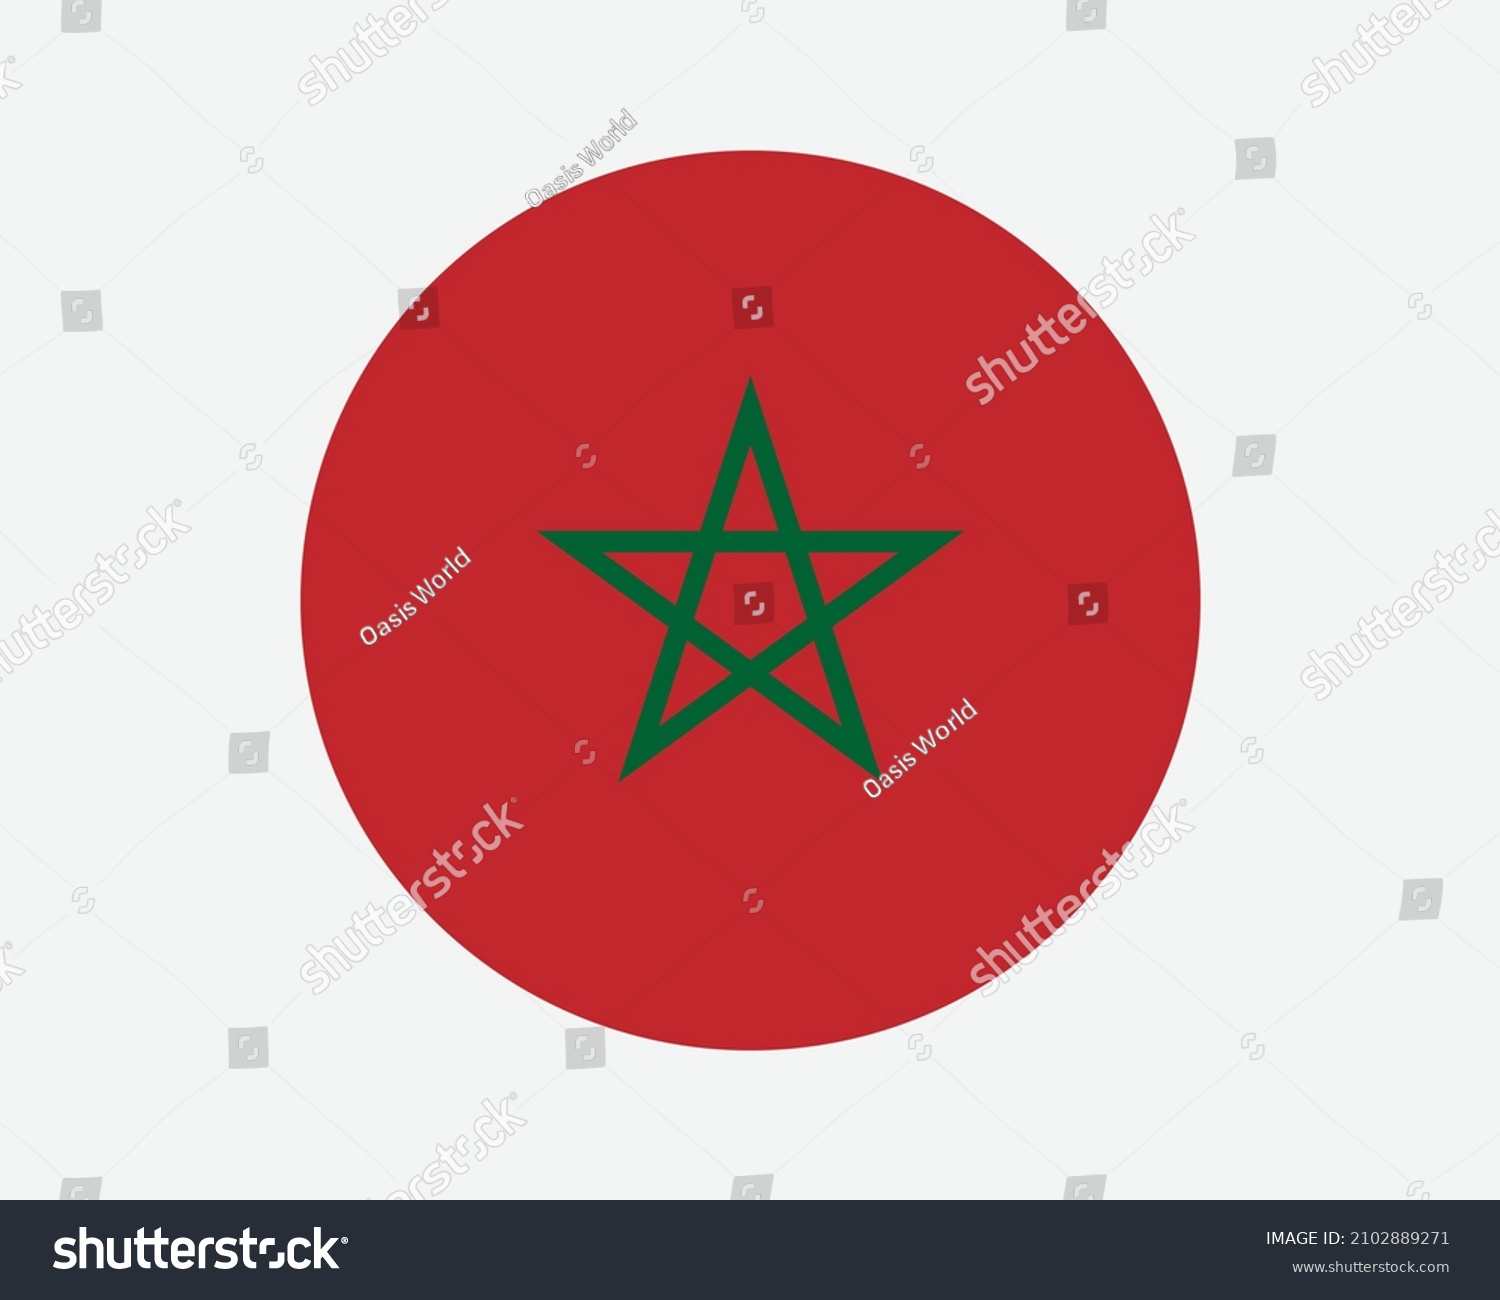 SVG of Morocco Round Country Flag. Moroccan Circle National Flag. Kingdom of Morocco Circular Shape Button Banner. EPS Vector Illustration. svg